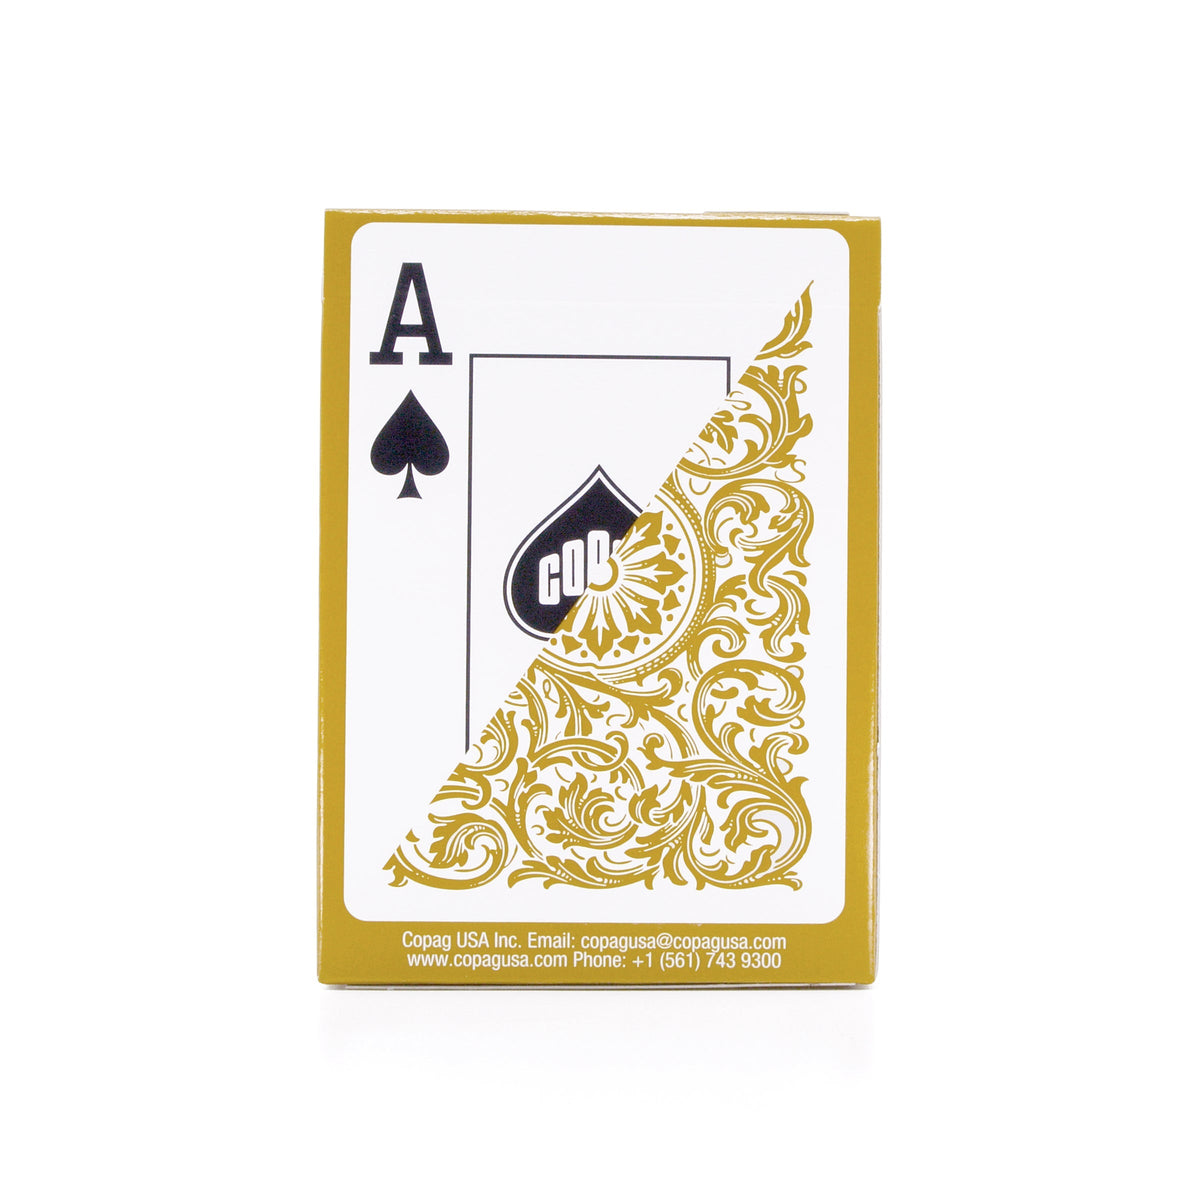 Gold barcode marked cards copag elite poker jumbo. Martin Kabrhel's Choice: Barcode Marked Cards for Poker Cheating | Copag Elite Jumbo | poker cheating devices